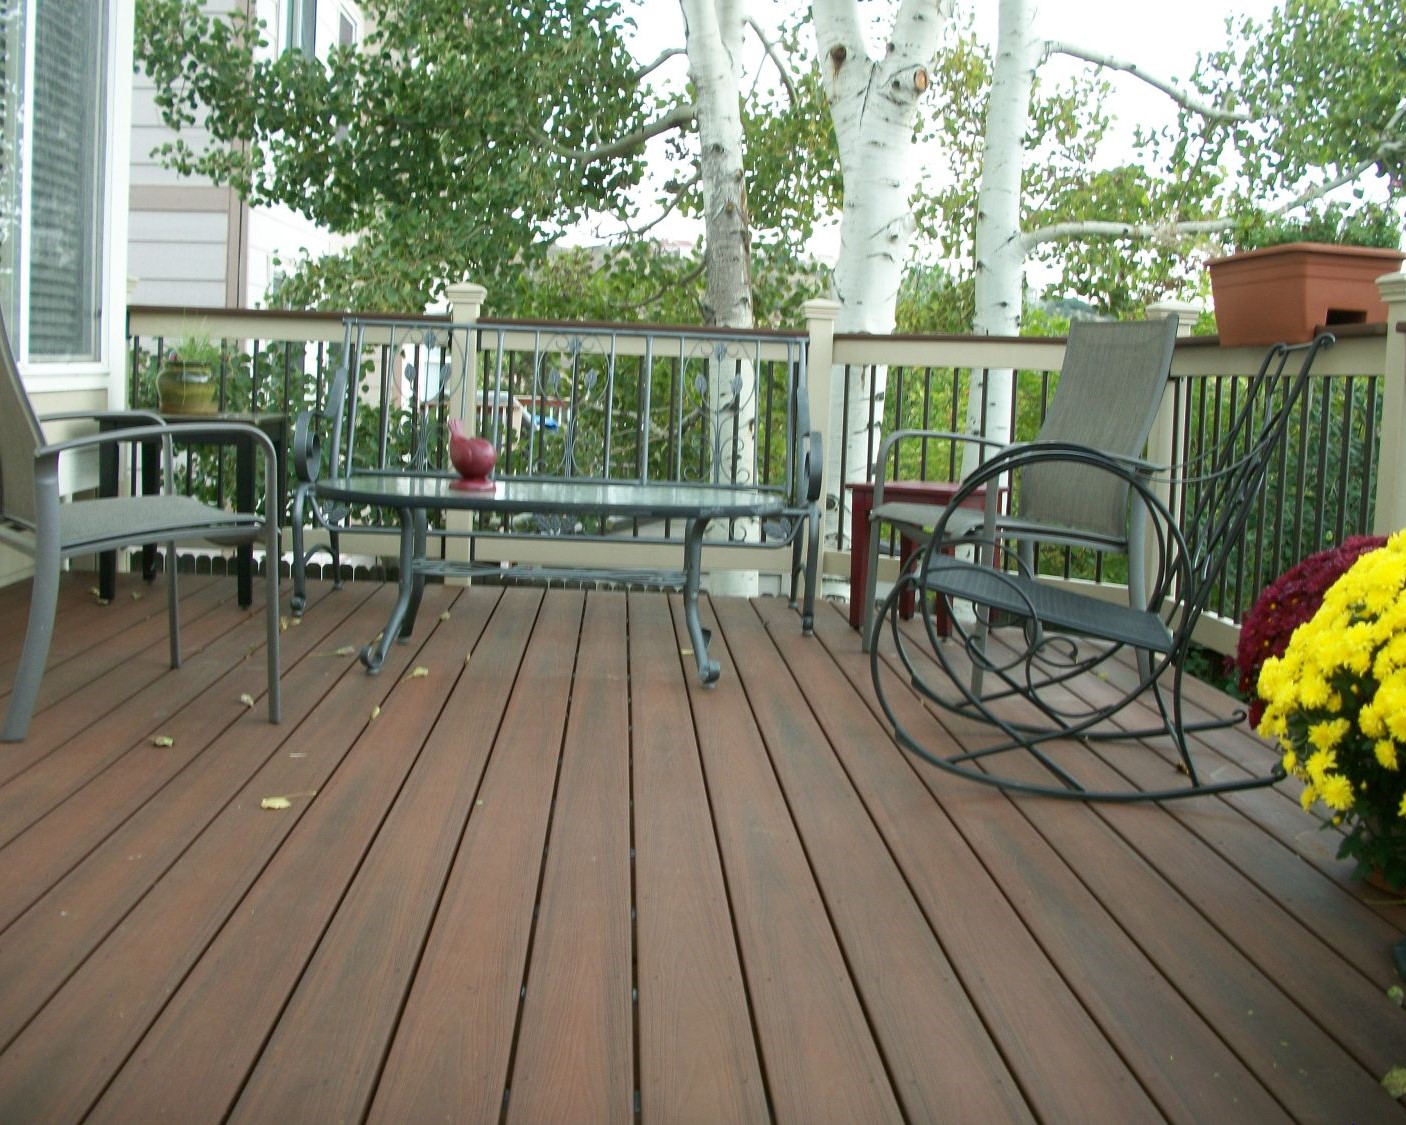 90-degree composite decking and railing with composite components and black metal balusters.